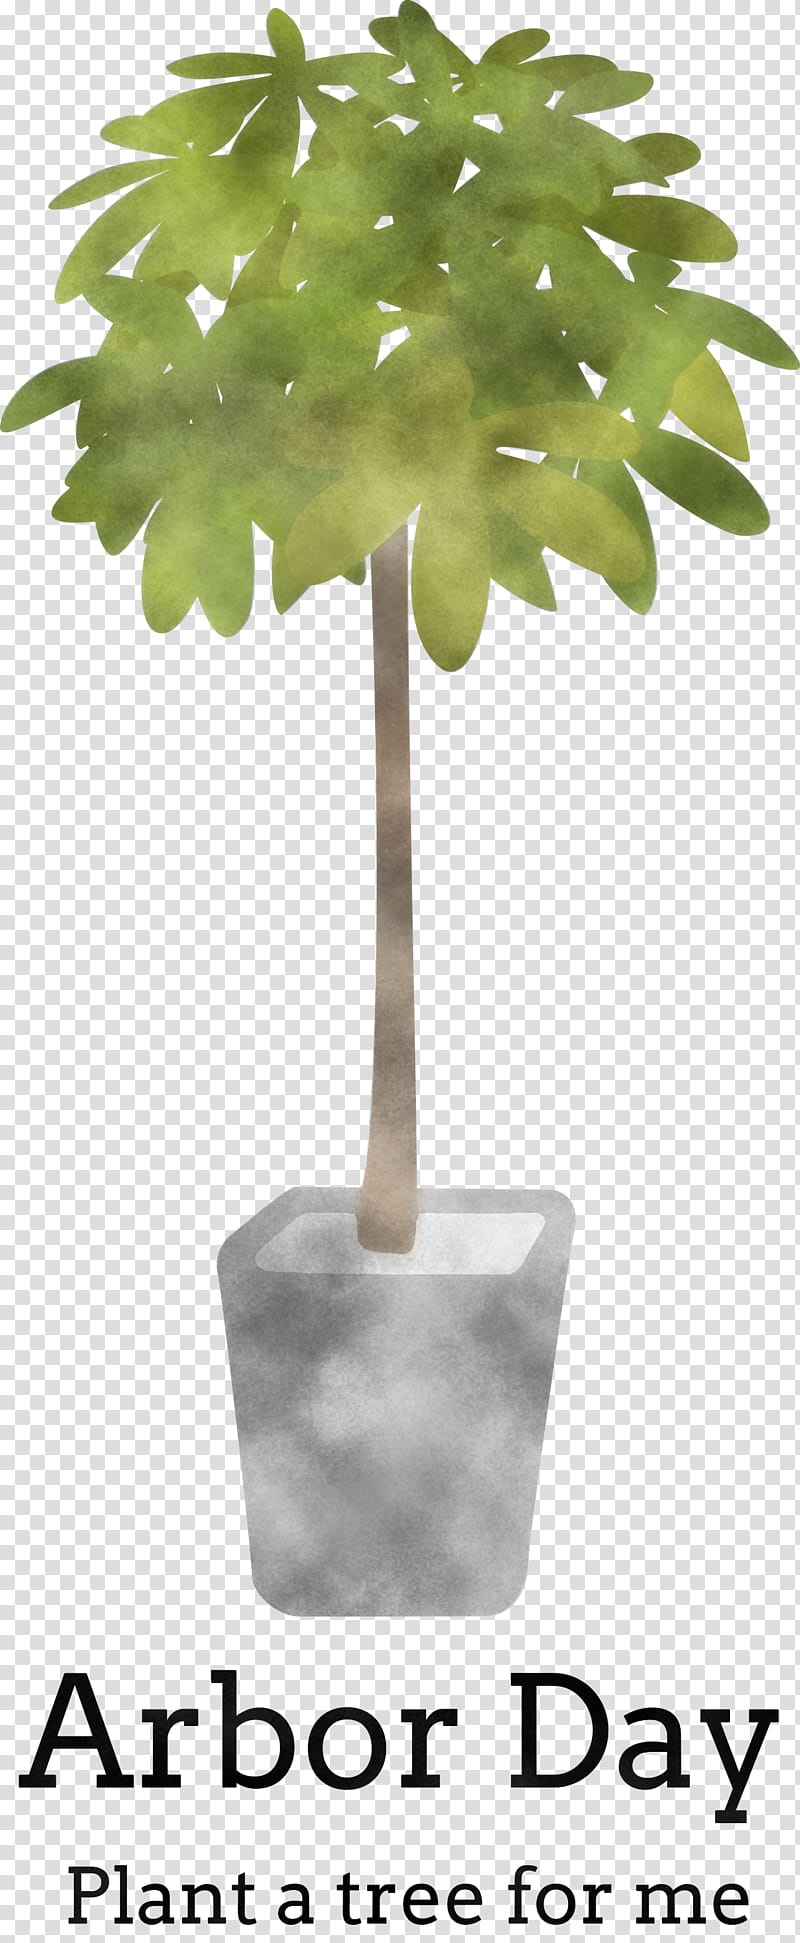 Arbor Day Green Earth Earth Day, Flowerpot, Leaf, Tree, Plant, Monstera Deliciosa, Woody Plant, Houseplant transparent background PNG clipart